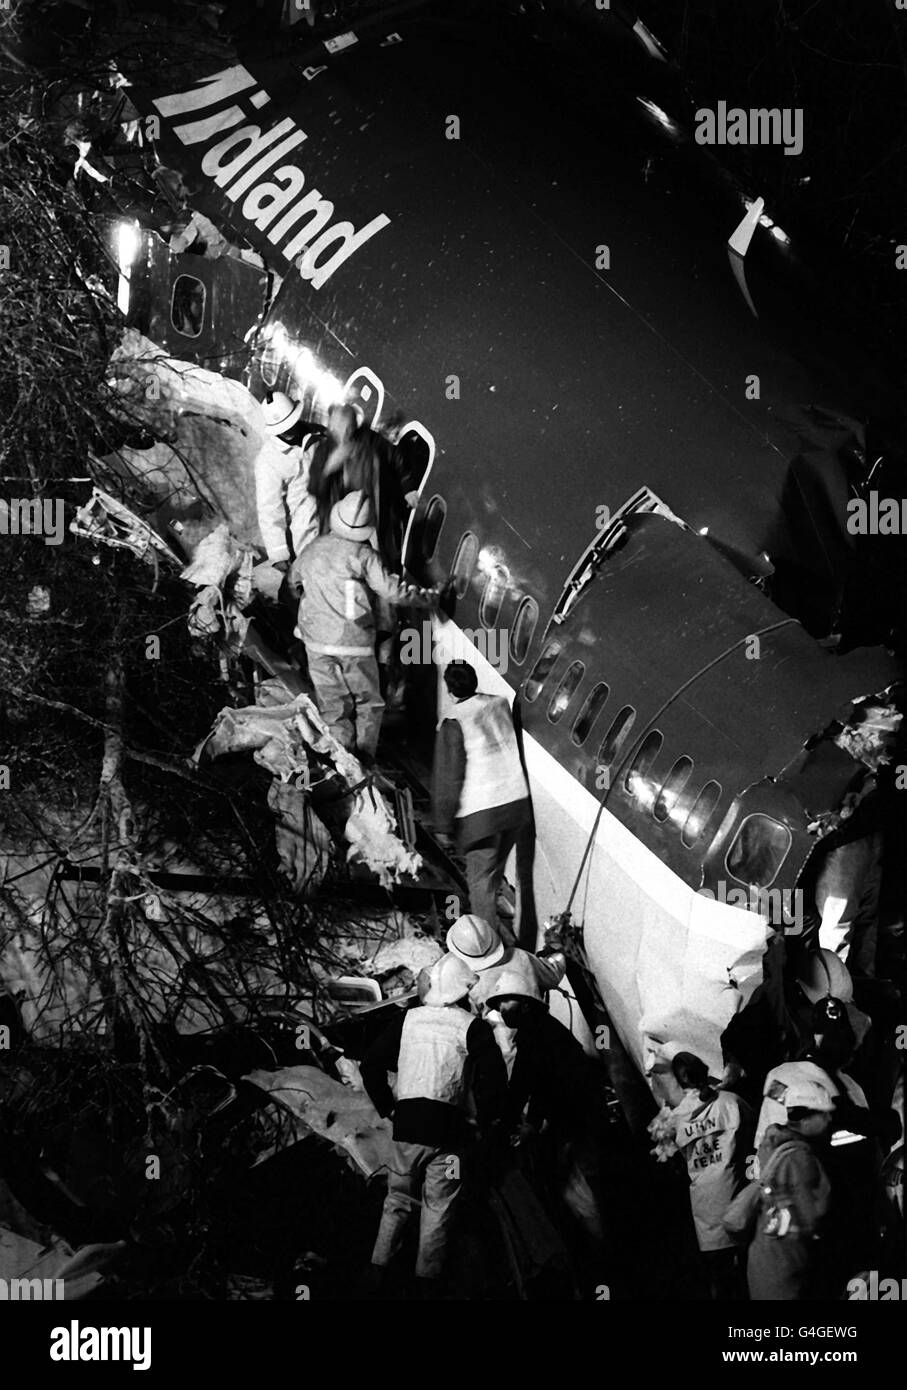 Library file dated 09.01.89. of rescue workers sifting through the broken remains of the British Midlands Boeing 737 400 on the M1 motorway embankment where forty-seven were killed when the aircraft crashed on Friday, January 8, 1989 near Kegworth, Leicestershire. This Friday (08.01.99) sees the tenth anniversary of the disaster. PA Photos. See PA story CRASH Kegworth. Stock Photo